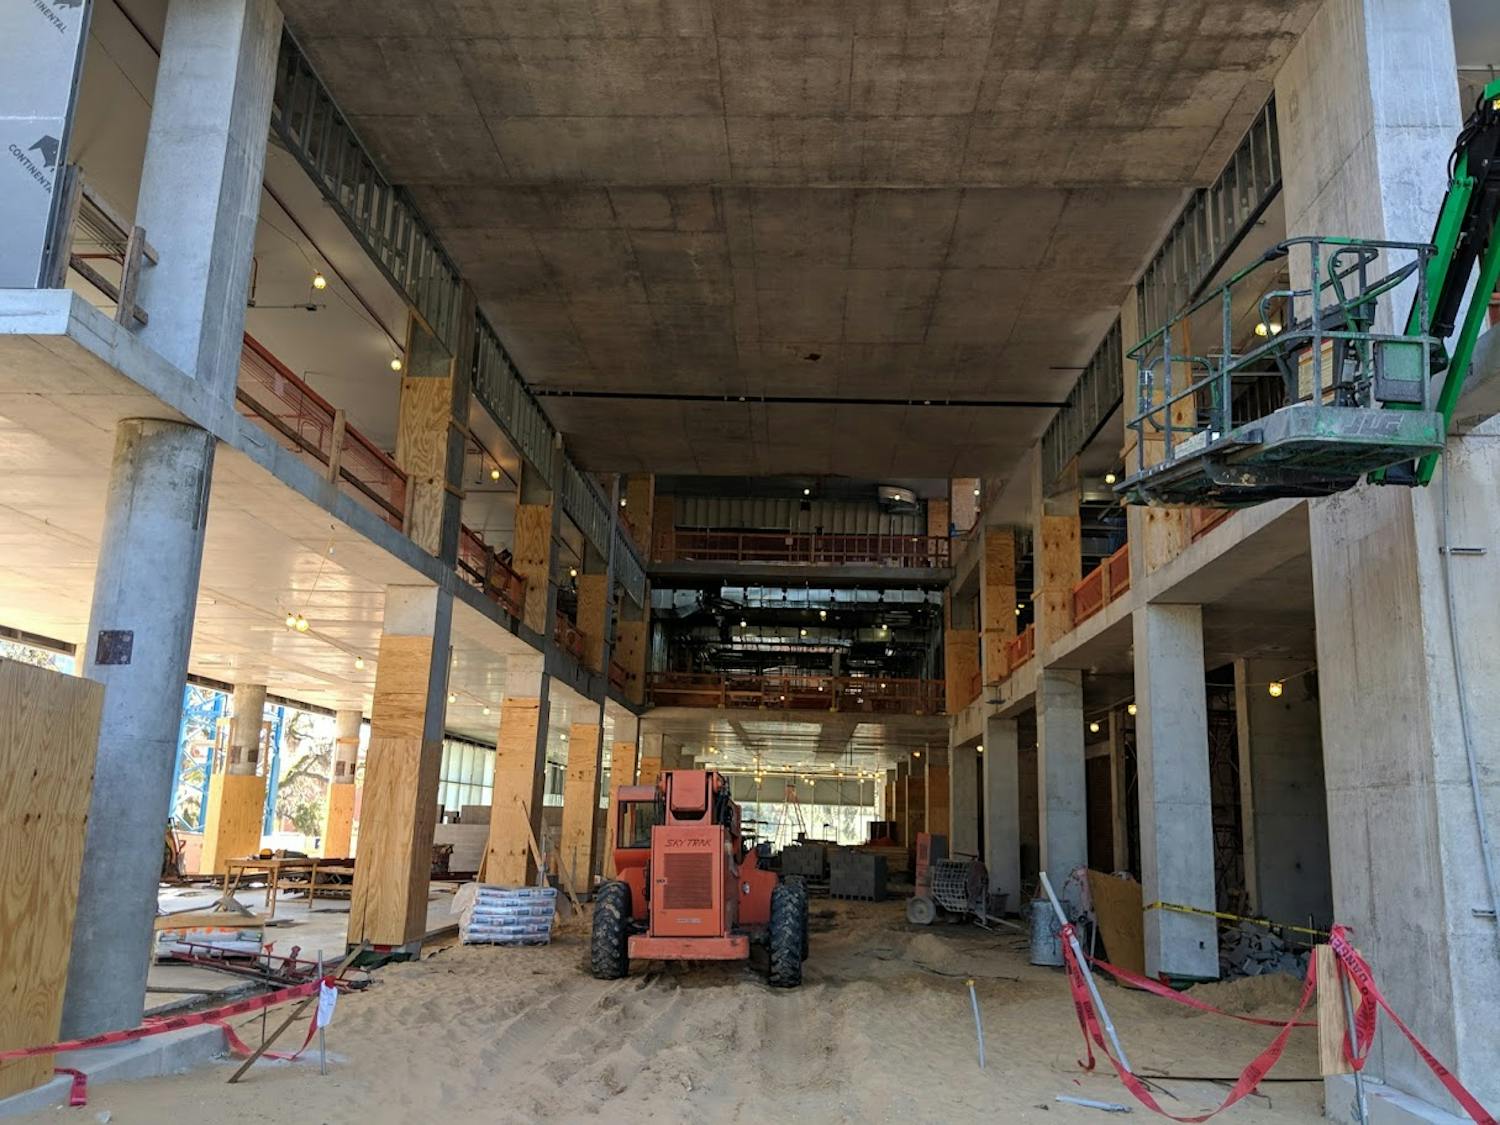 The construction of the Herbert Wertheim Laboratory for Engineering Excellence is projected to cost more than $70 million, which is $20 million more than its projected cost. The building is located between the Reitz Union and Weimer Hall, and it will house study rooms and labs.  